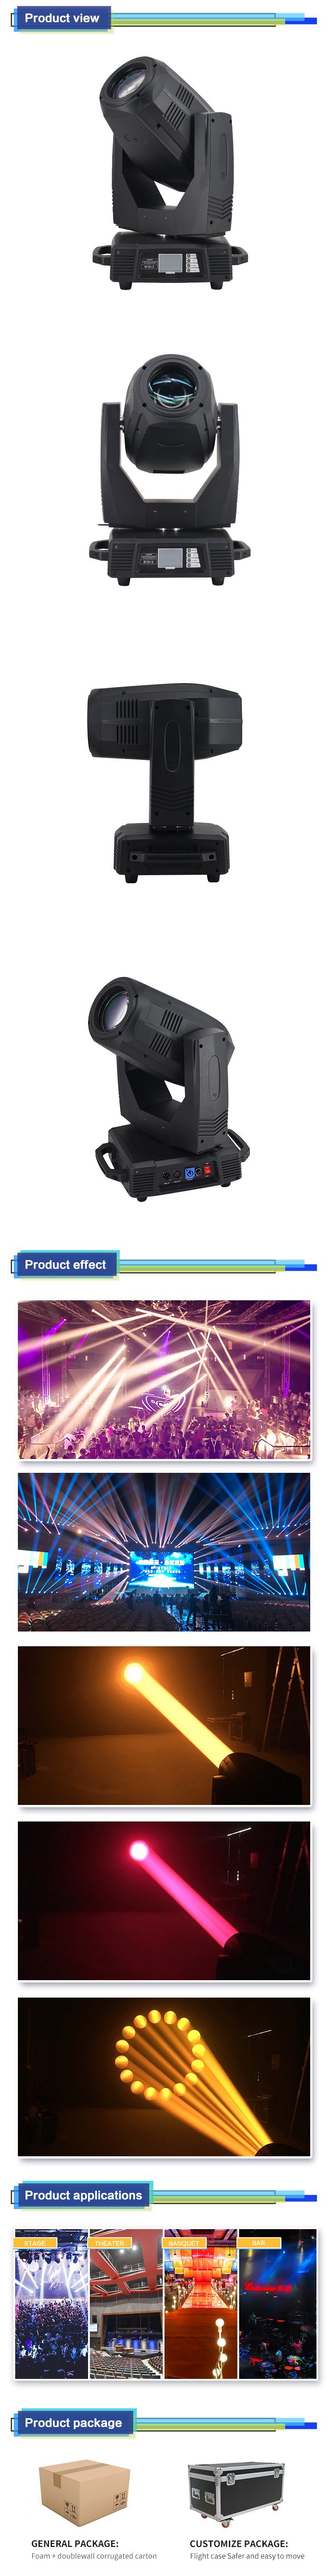 350W 3in1 Beam Spot Wash Moving Head Projectors for DJ